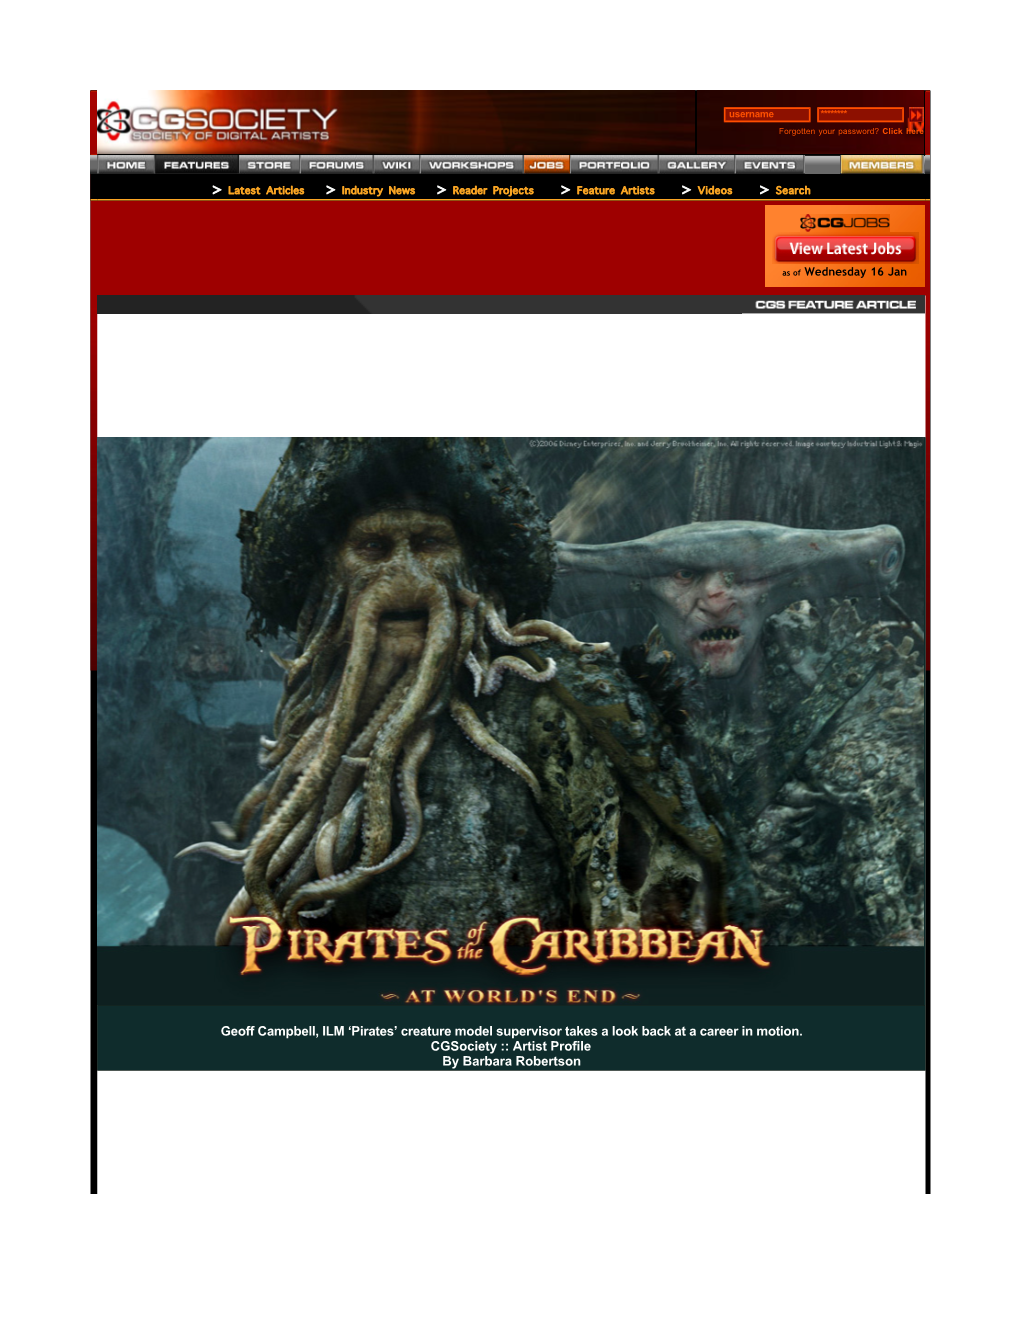 'Pirates of the Caribbean at World's End'